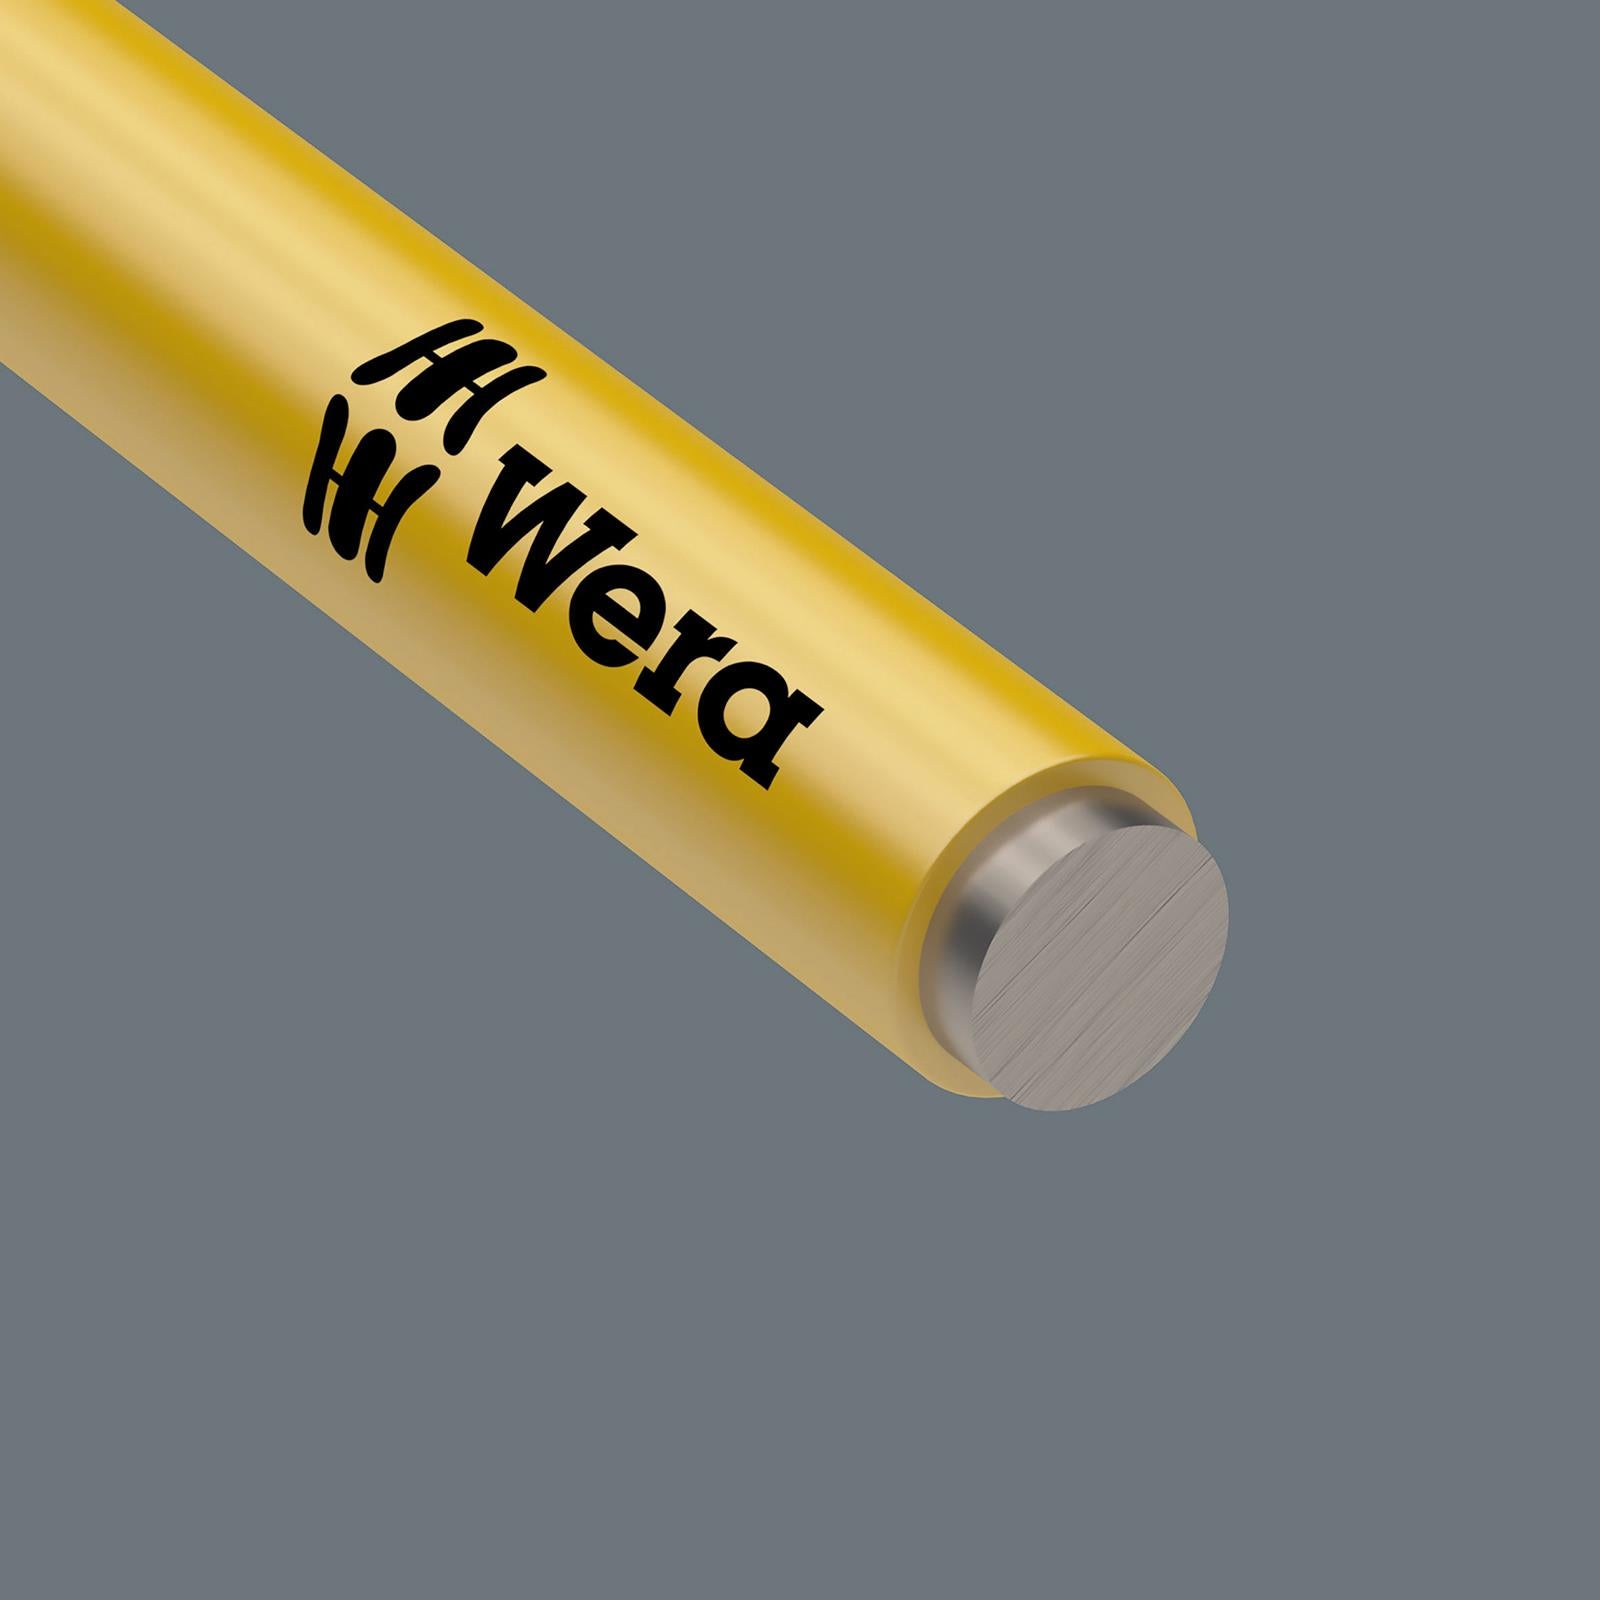 Wera Hex Key 3950 SPKL Multicolour HF L-Key Metric Stainless Steel with Holding Function Individual